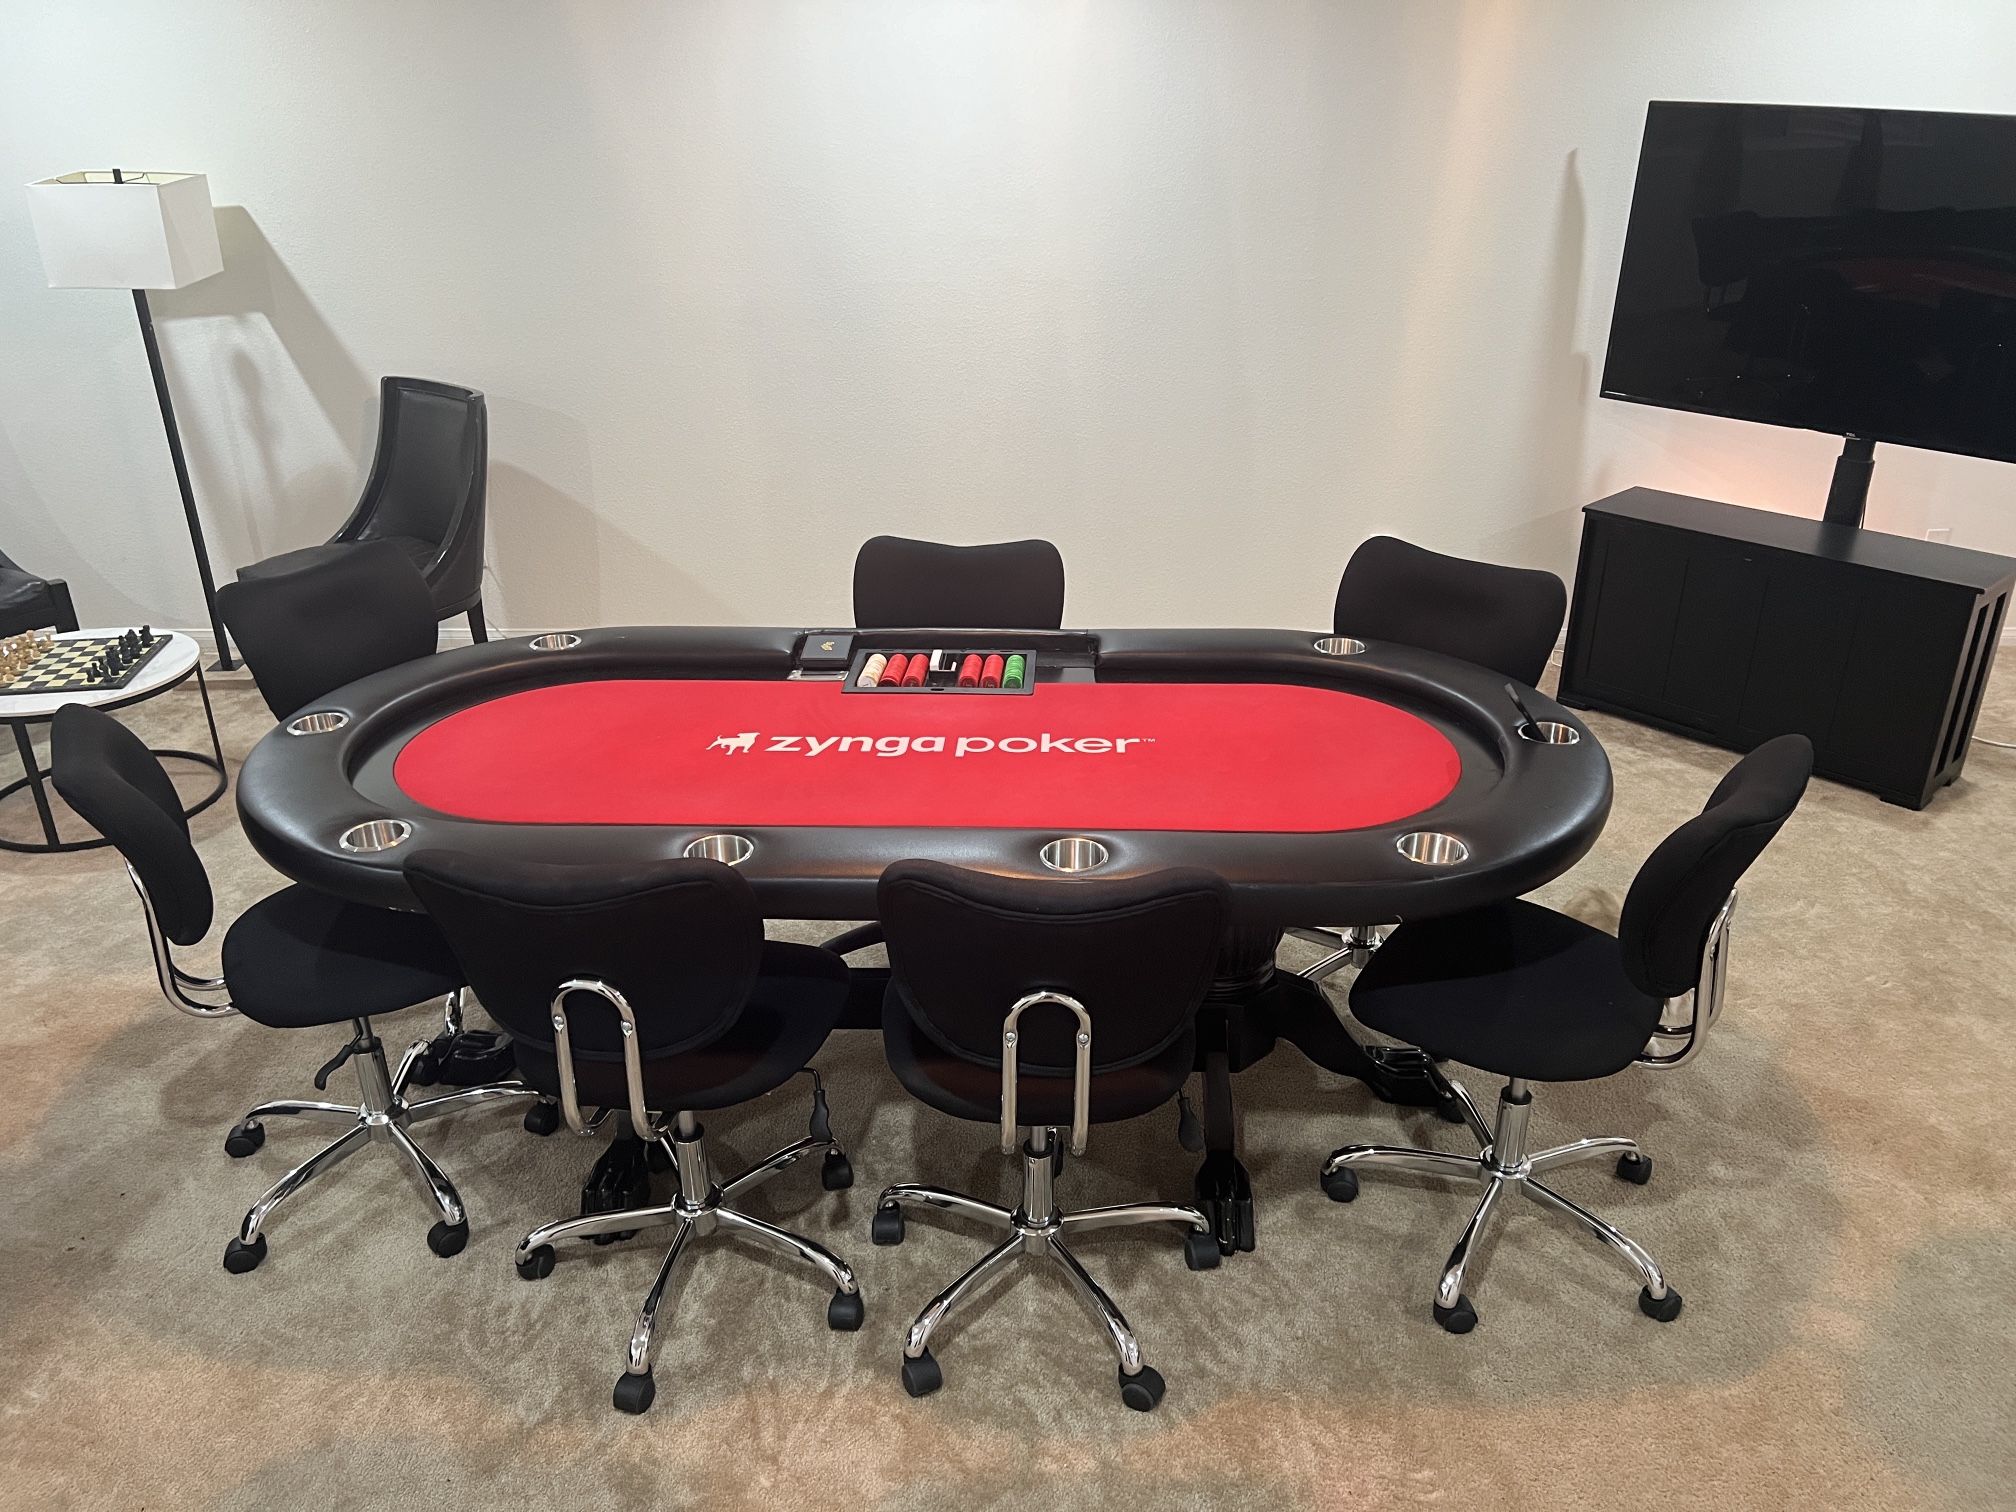 Full-Size Poker Table With Table Top 8' X 4'